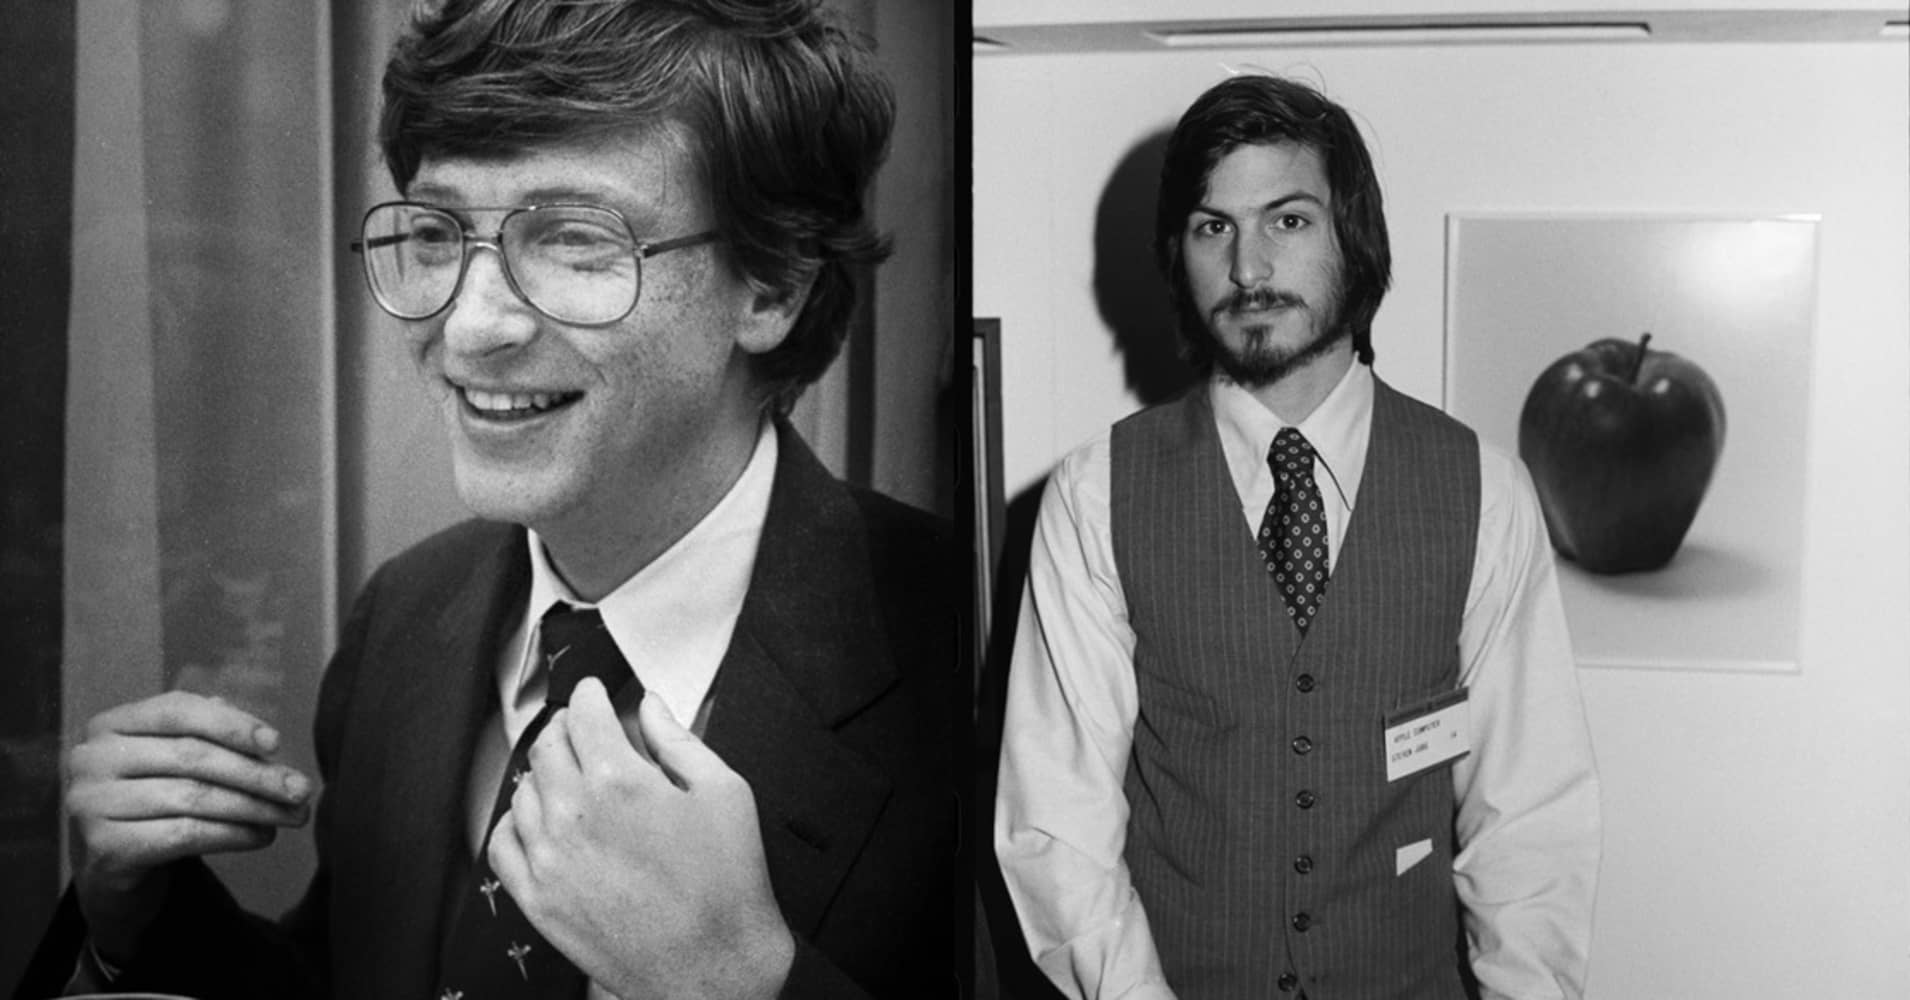 Who is steve jobs and bill gates